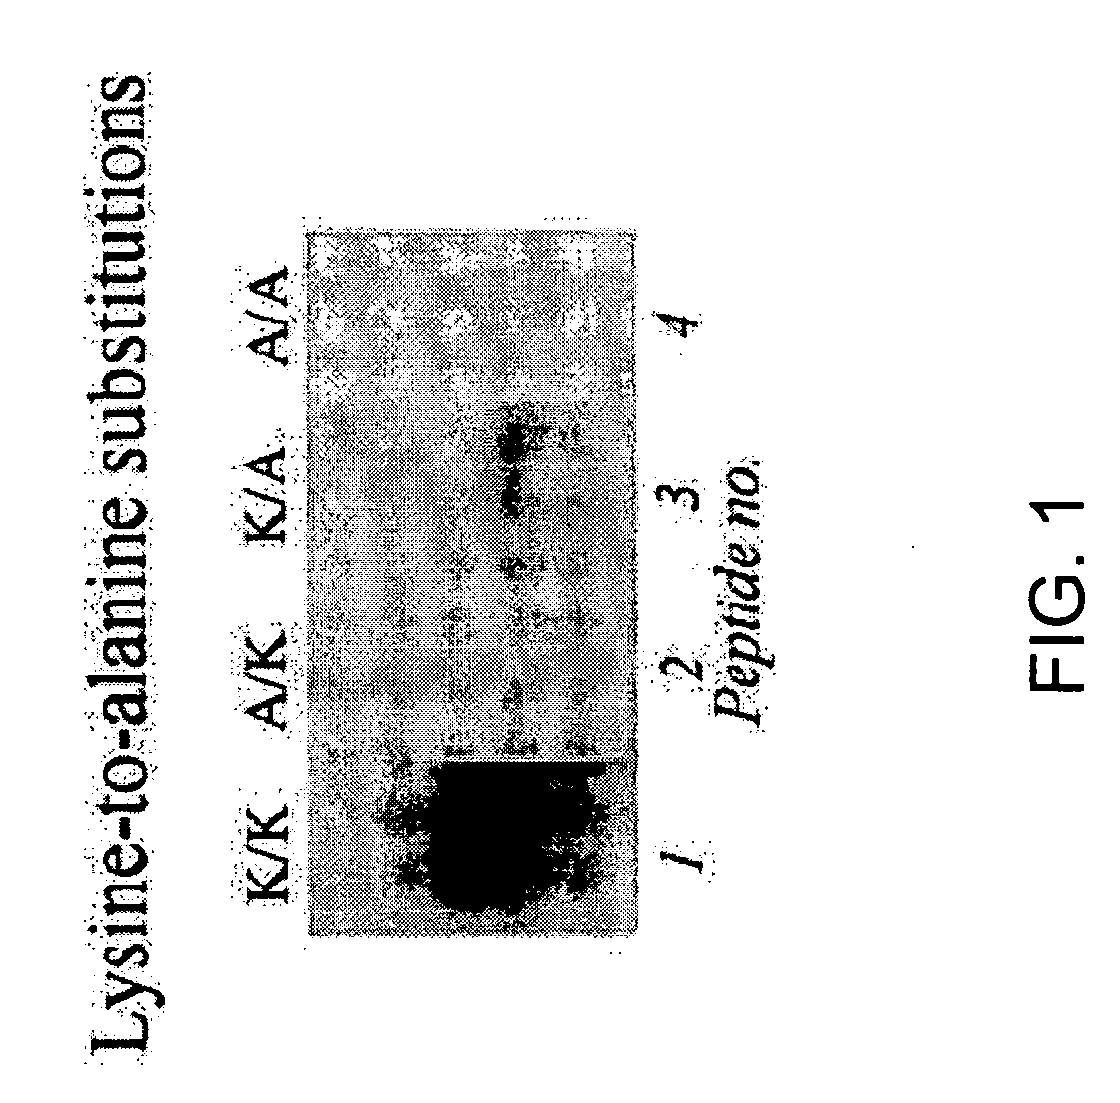 Antibodies against biotinylated histones and related proteins and assays related thereto